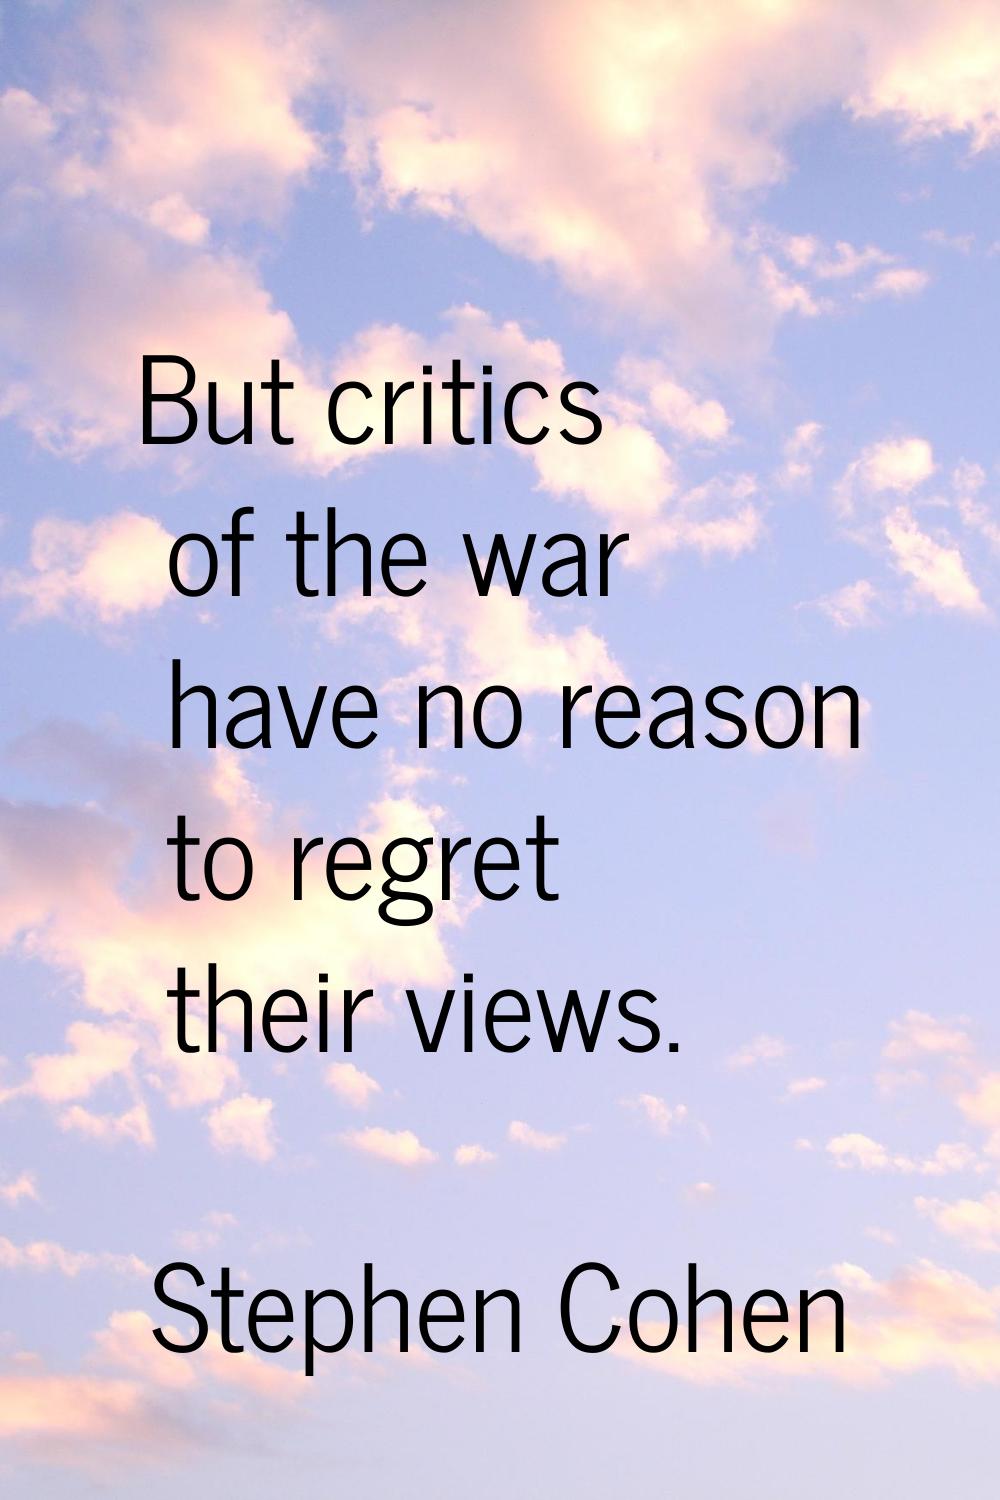 But critics of the war have no reason to regret their views.